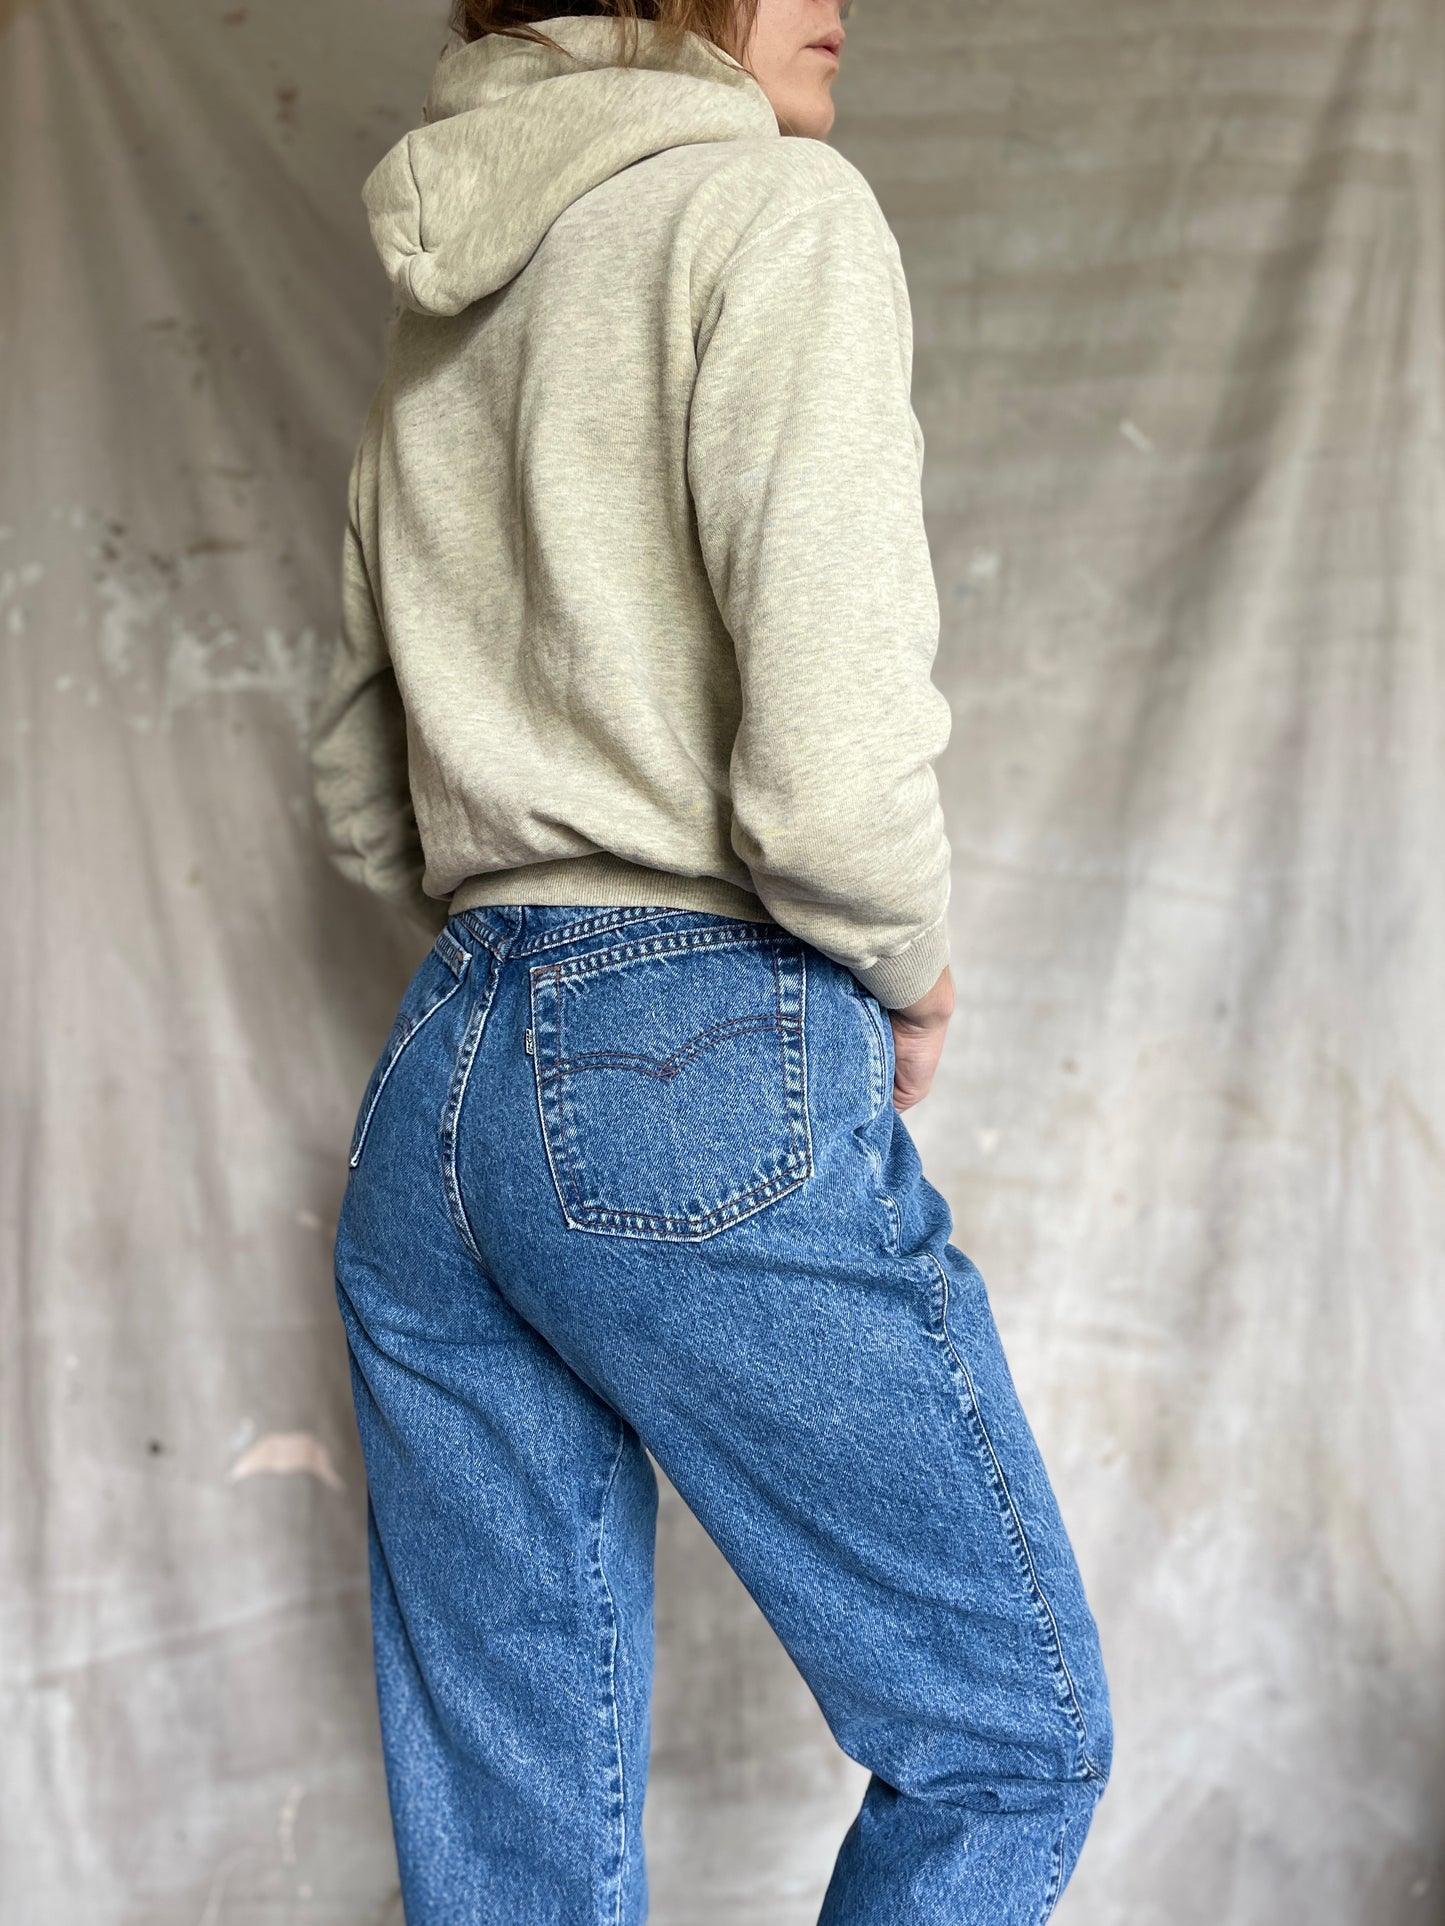 80s Tapered Levi’s Jeans